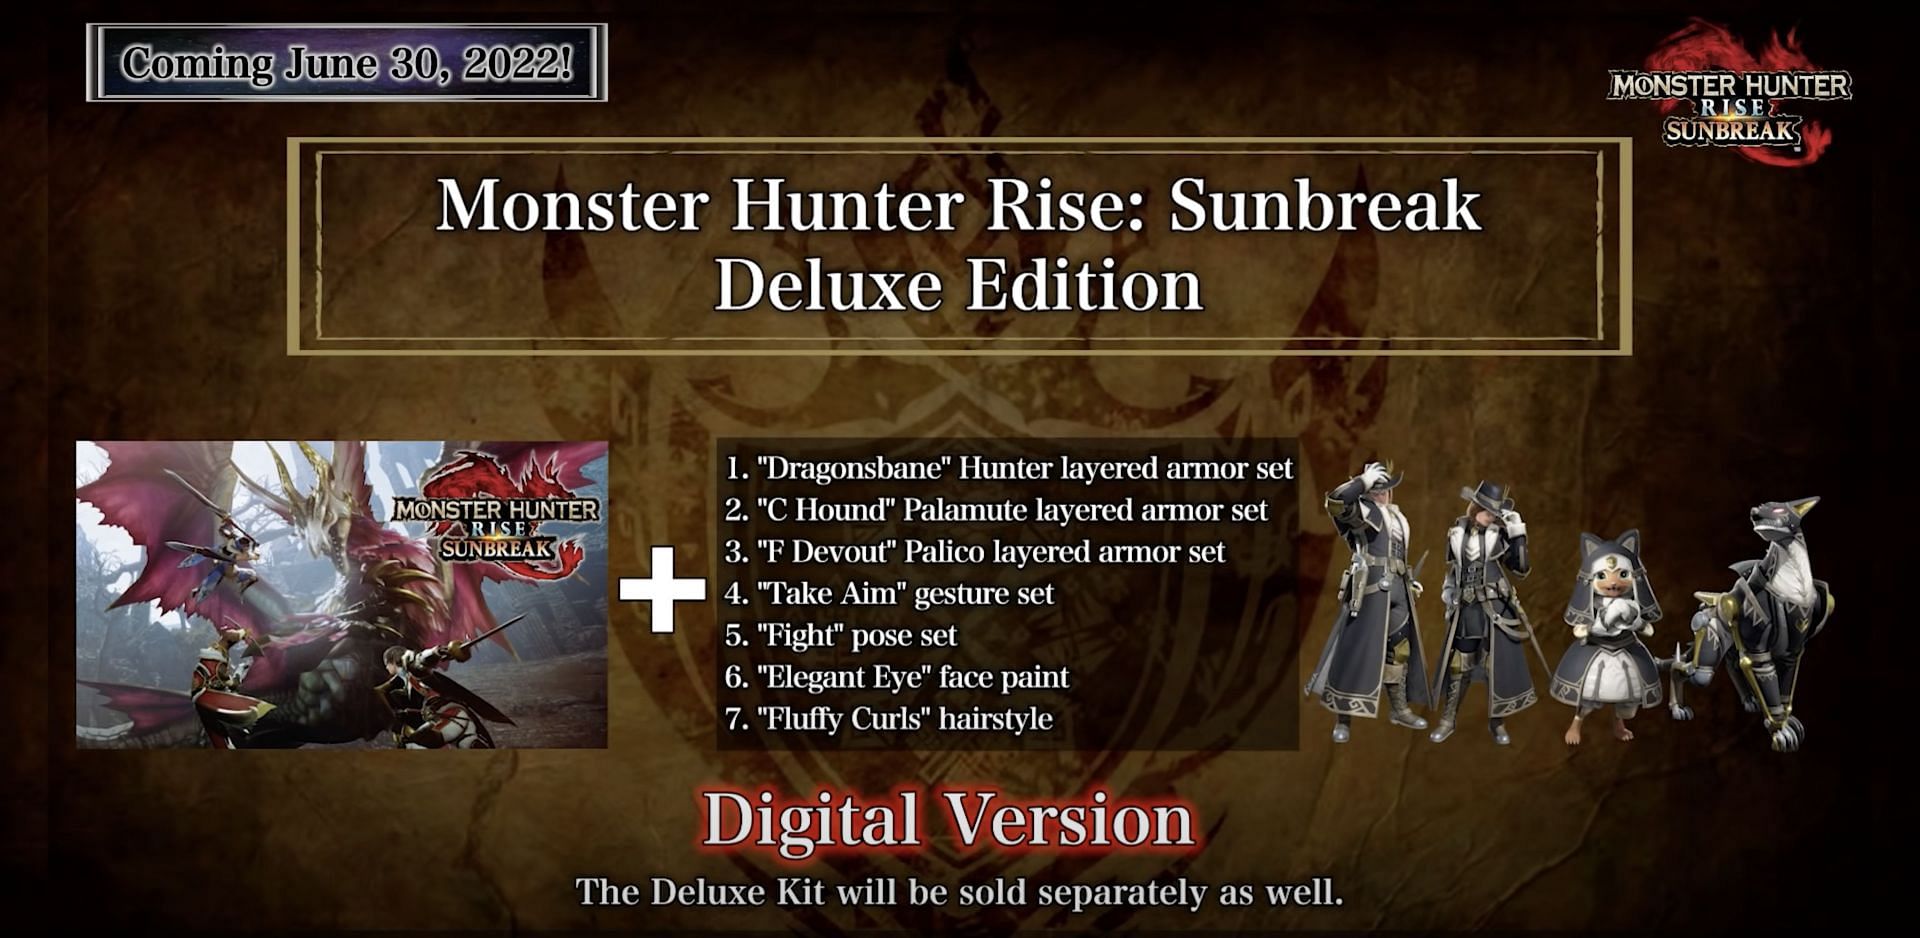 Players will be able to purchase the Deluxe Edition in order to gain more valuable rewards in-game (Image via Monster Hunter/YouTube)